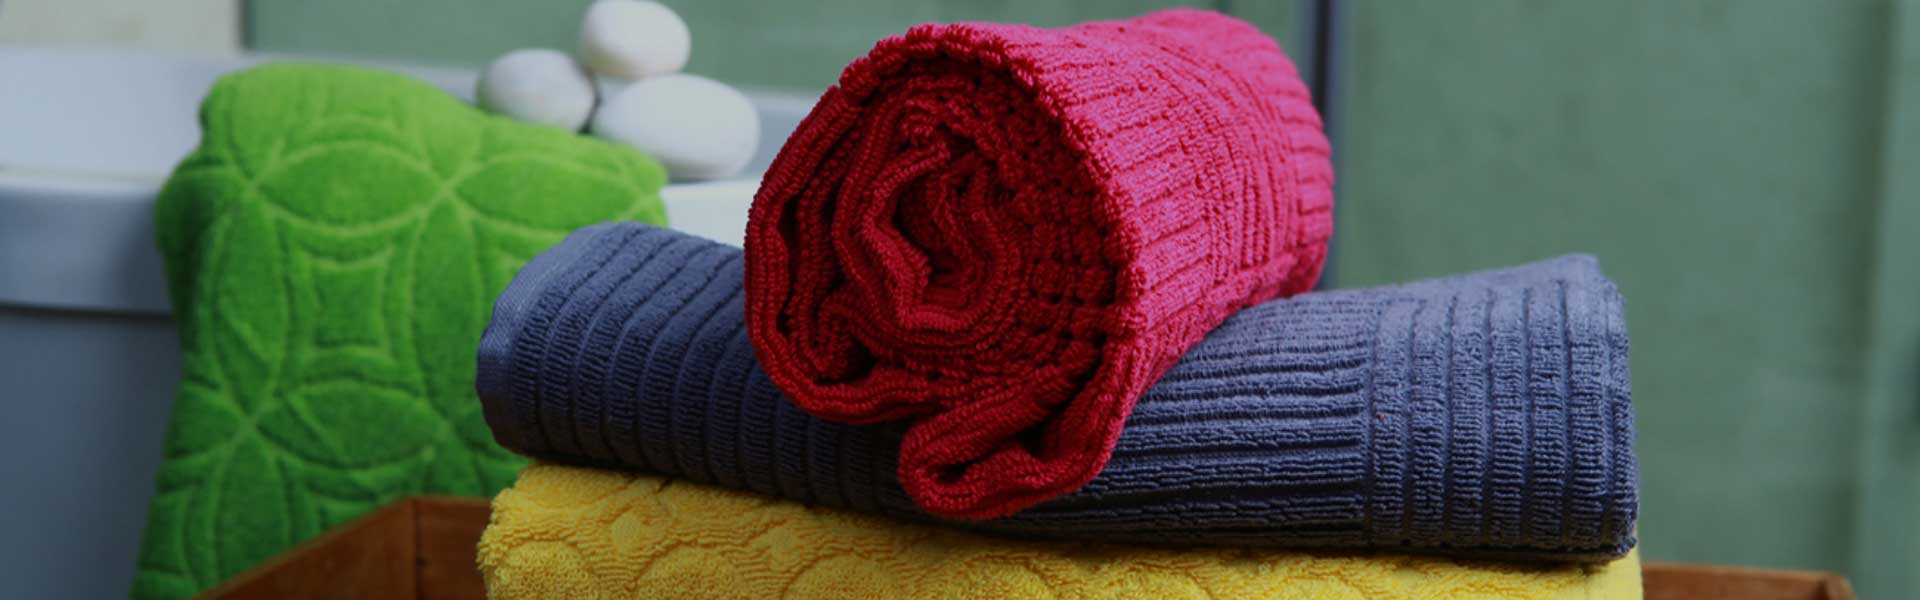 Terry Cotton Towel Exporter in India ,Terry Cotton Towel